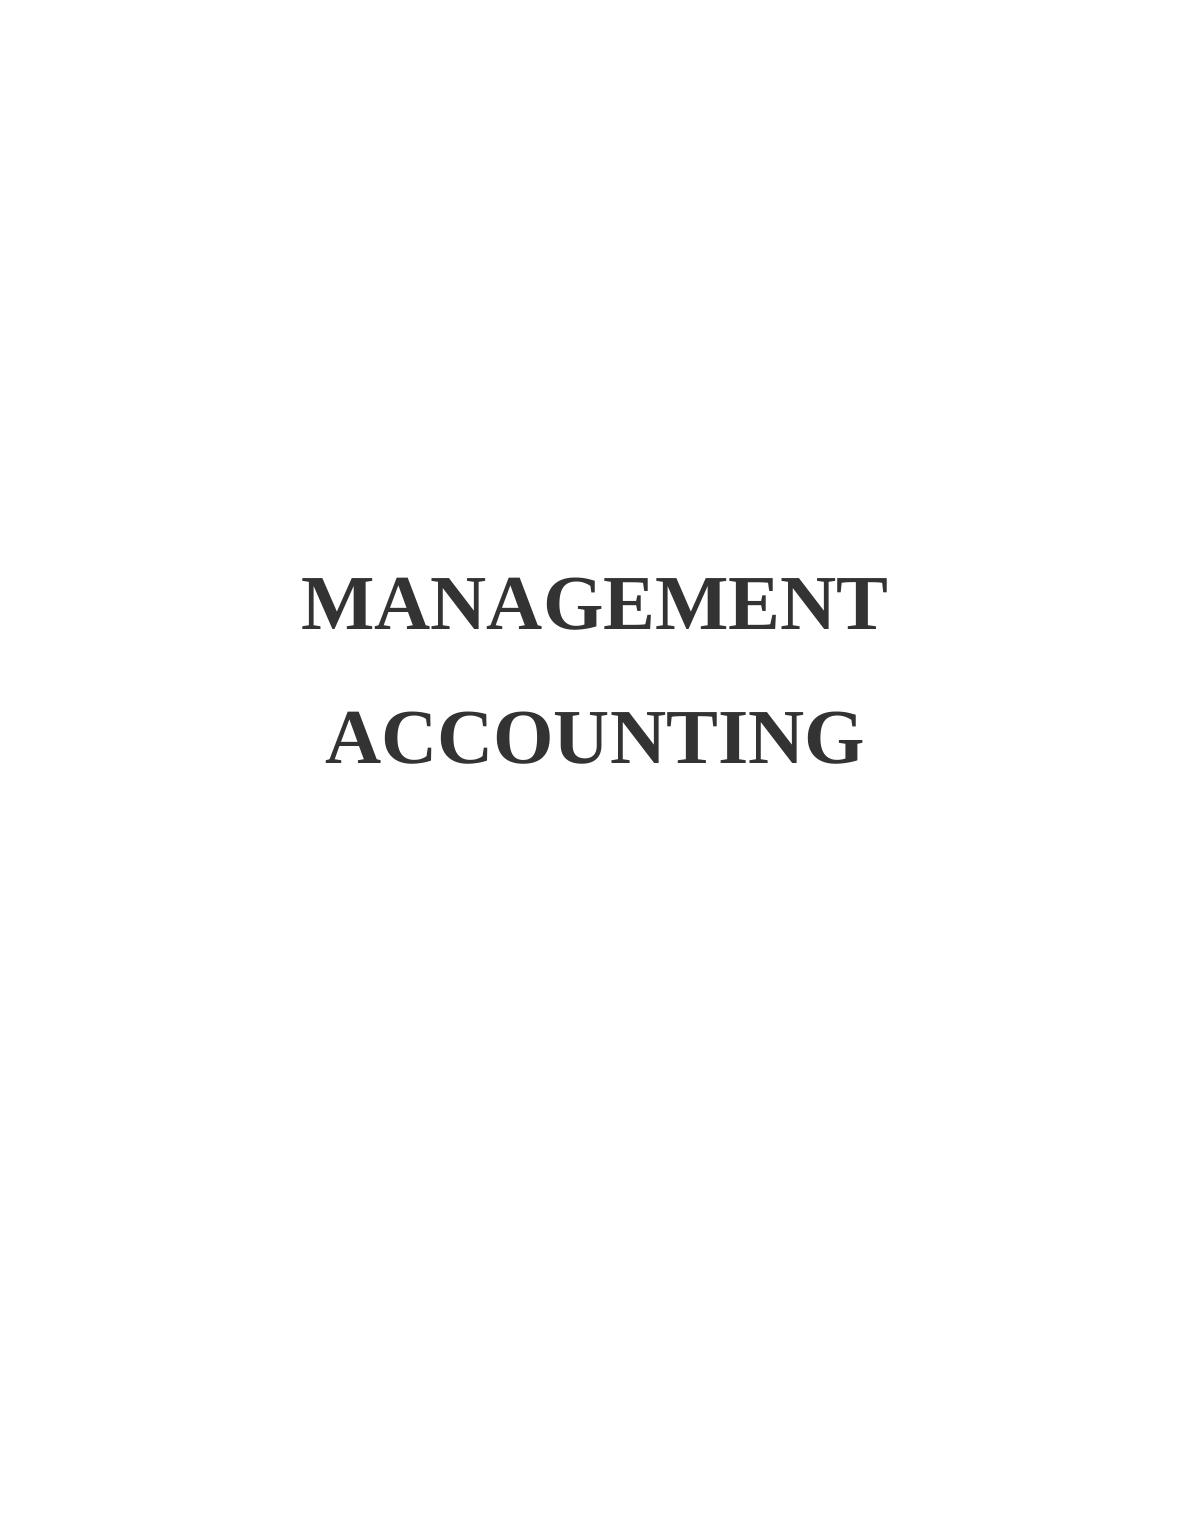 Management Accounting (MA) Solved Assignment_1